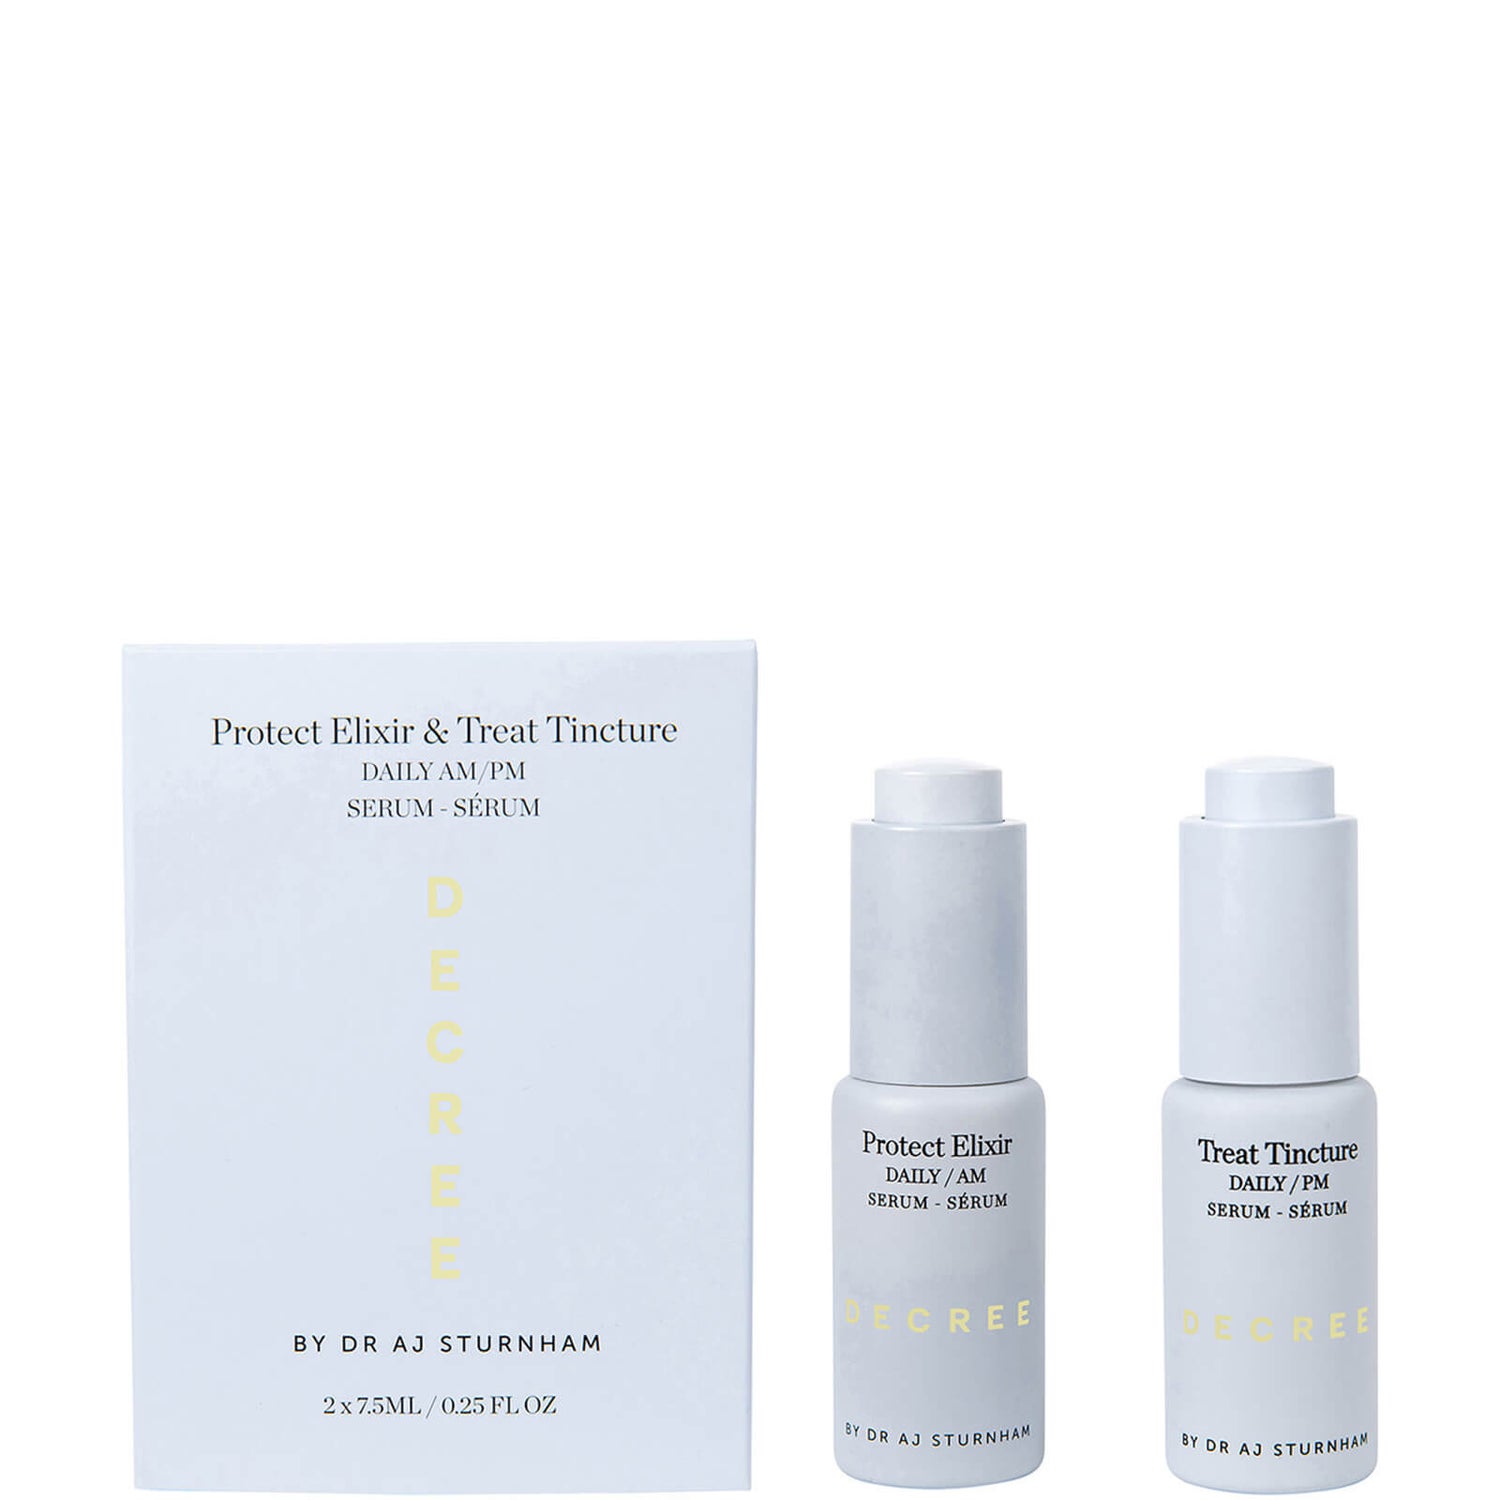 Decree Treat Tincture and Protect Elixir Discovery Duo